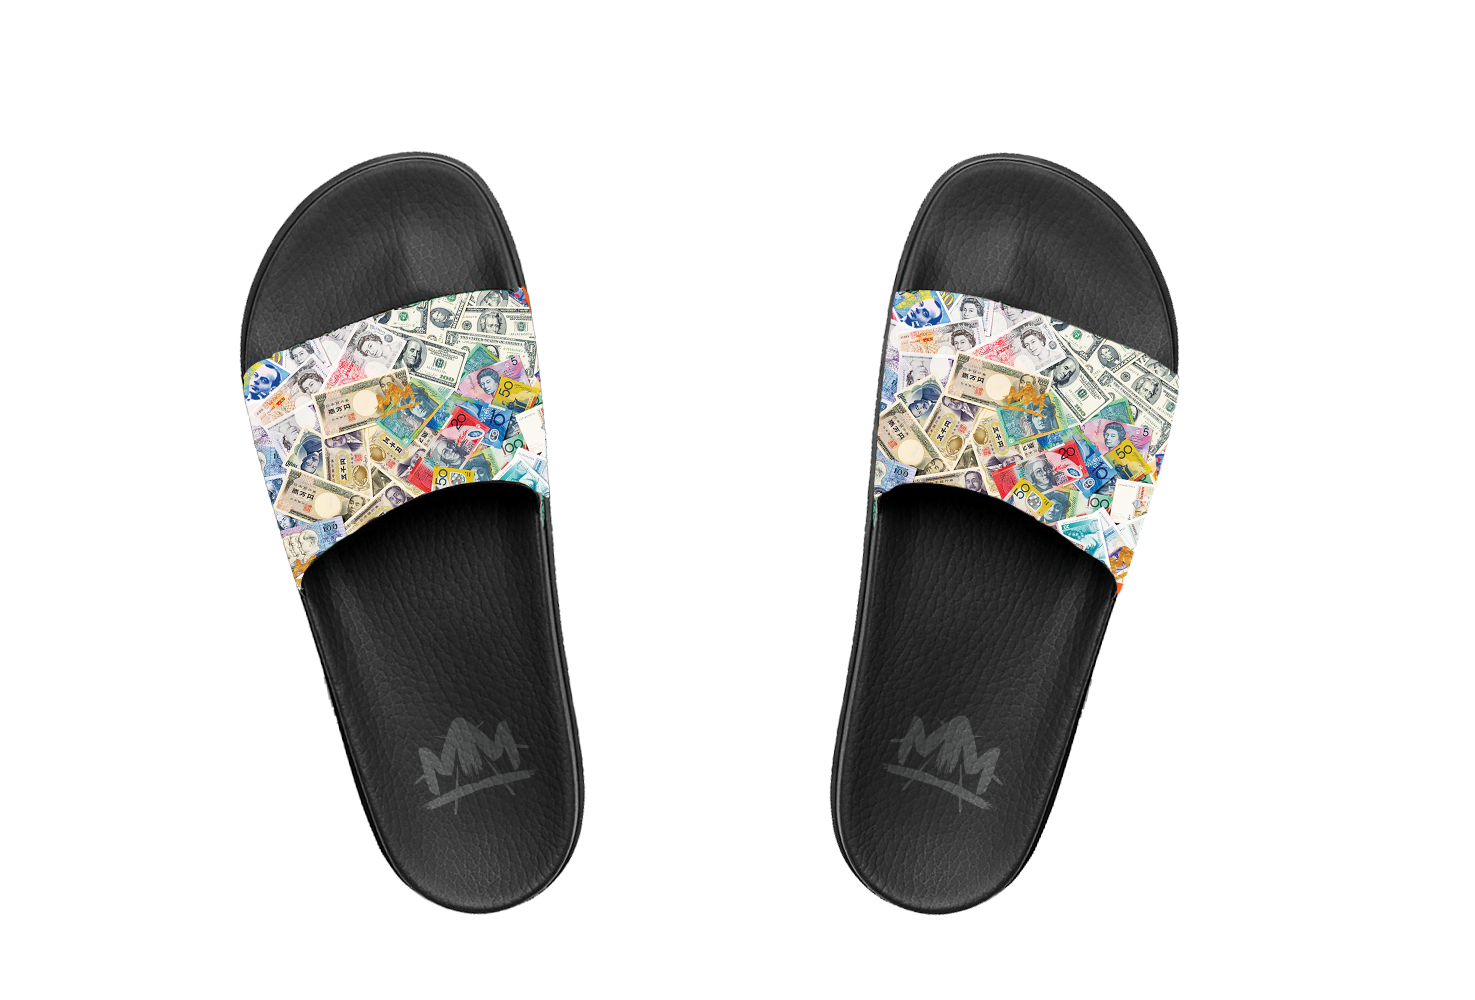 5 Fly Summer Slides That Are Cute And Comfortable